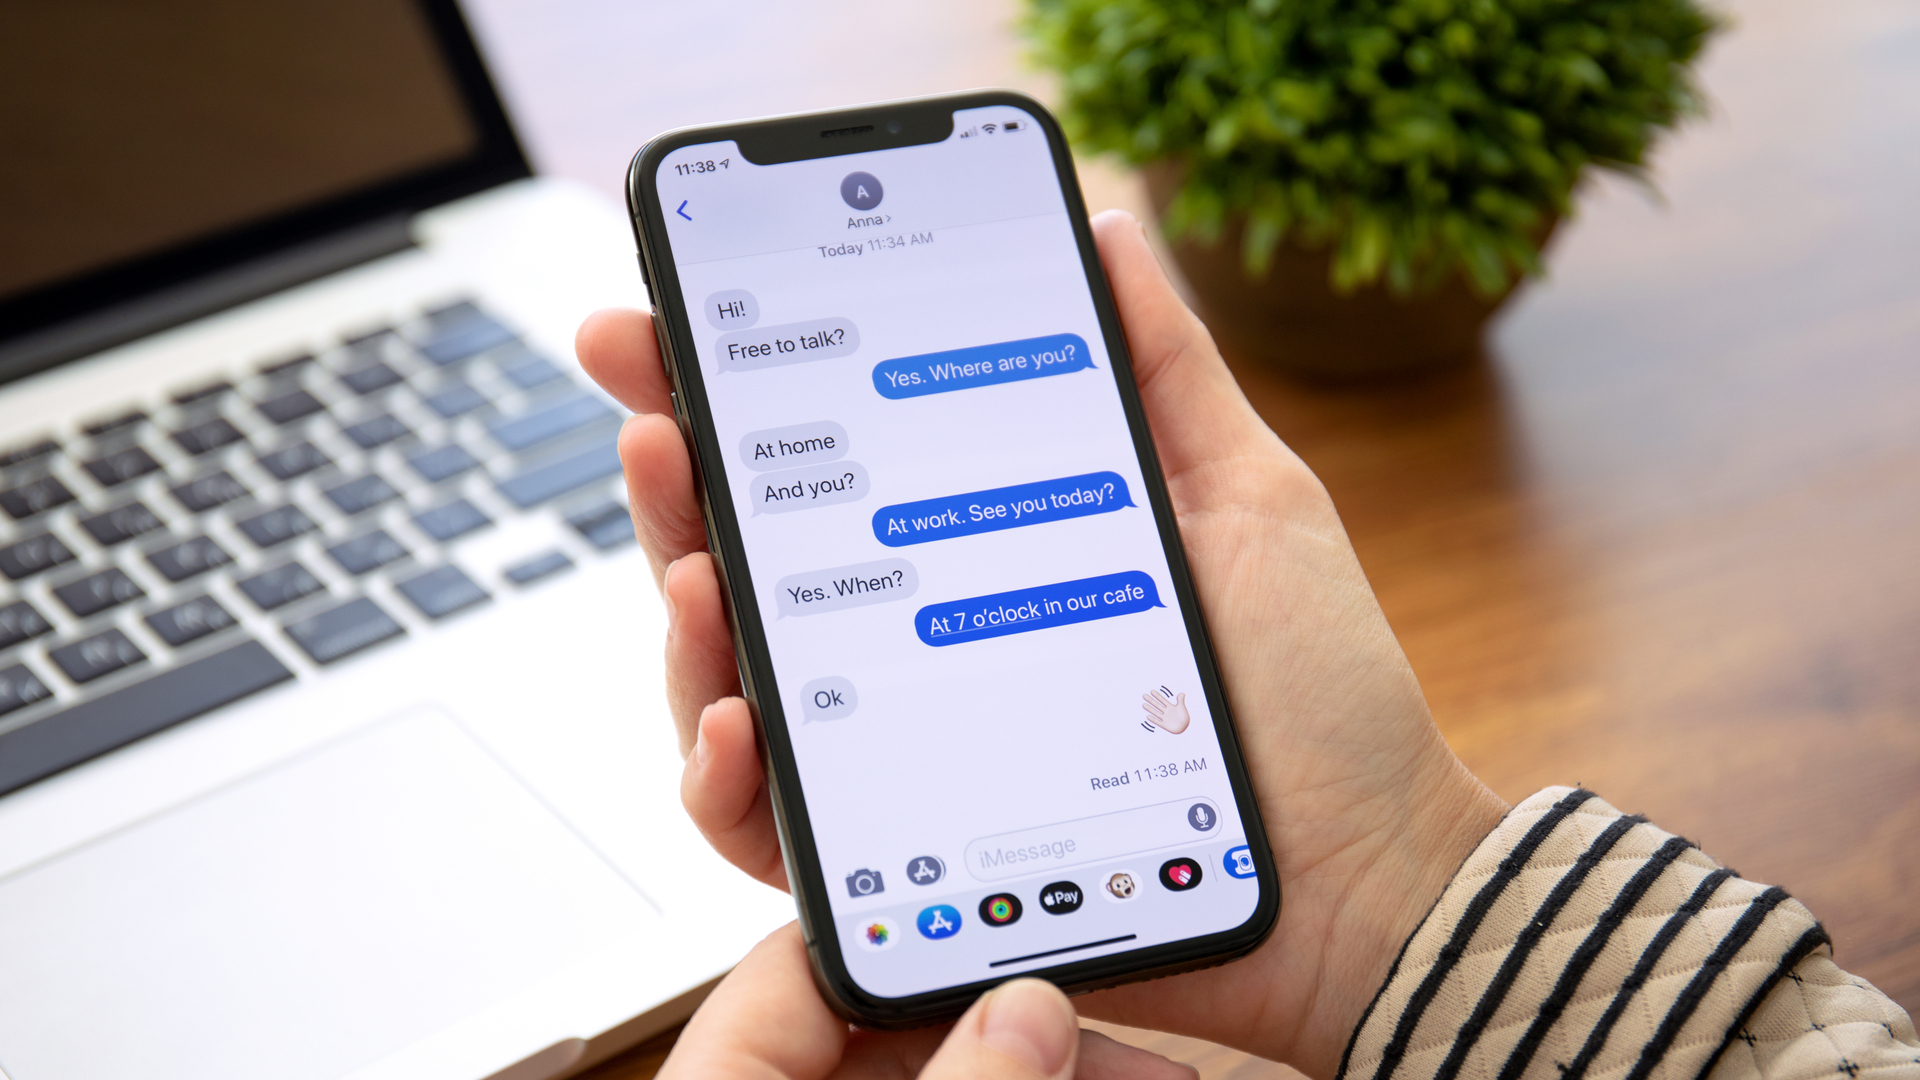 Image showing iPhone with iMessage app open